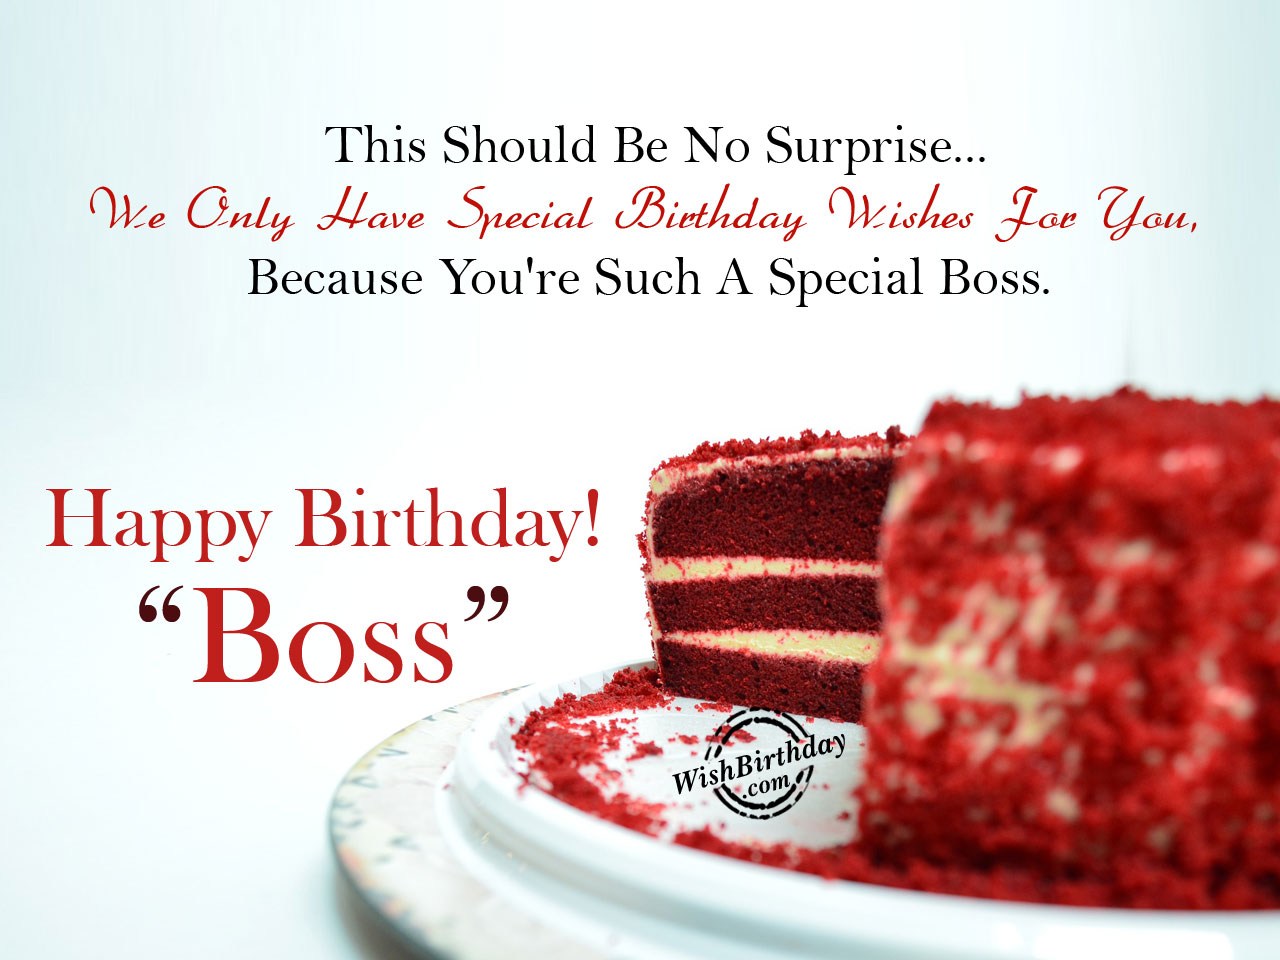 You Are Such A Special Boss - Birthday Wishes, Happy Birthday Pictures